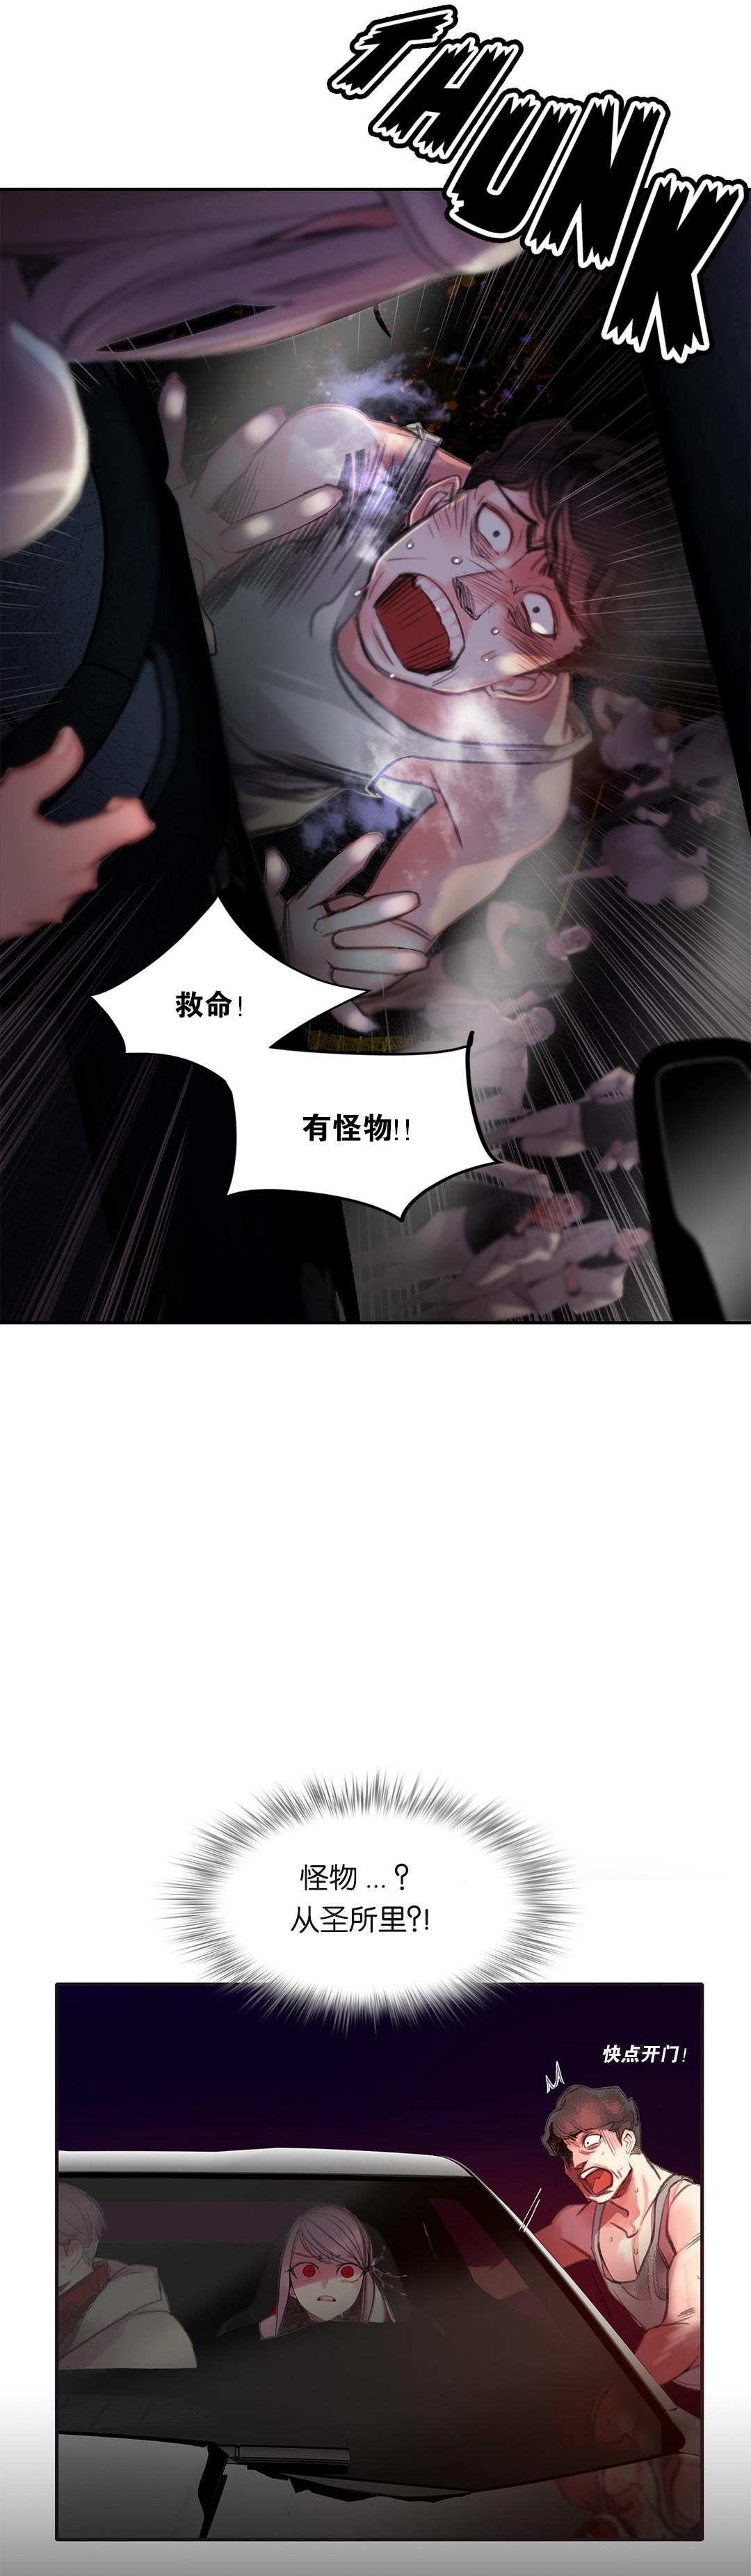 [Juder] Lilith`s Cord (第二季) Ch.61-65 [Chinese] [aaatwist个人汉化] [Ongoing] 14